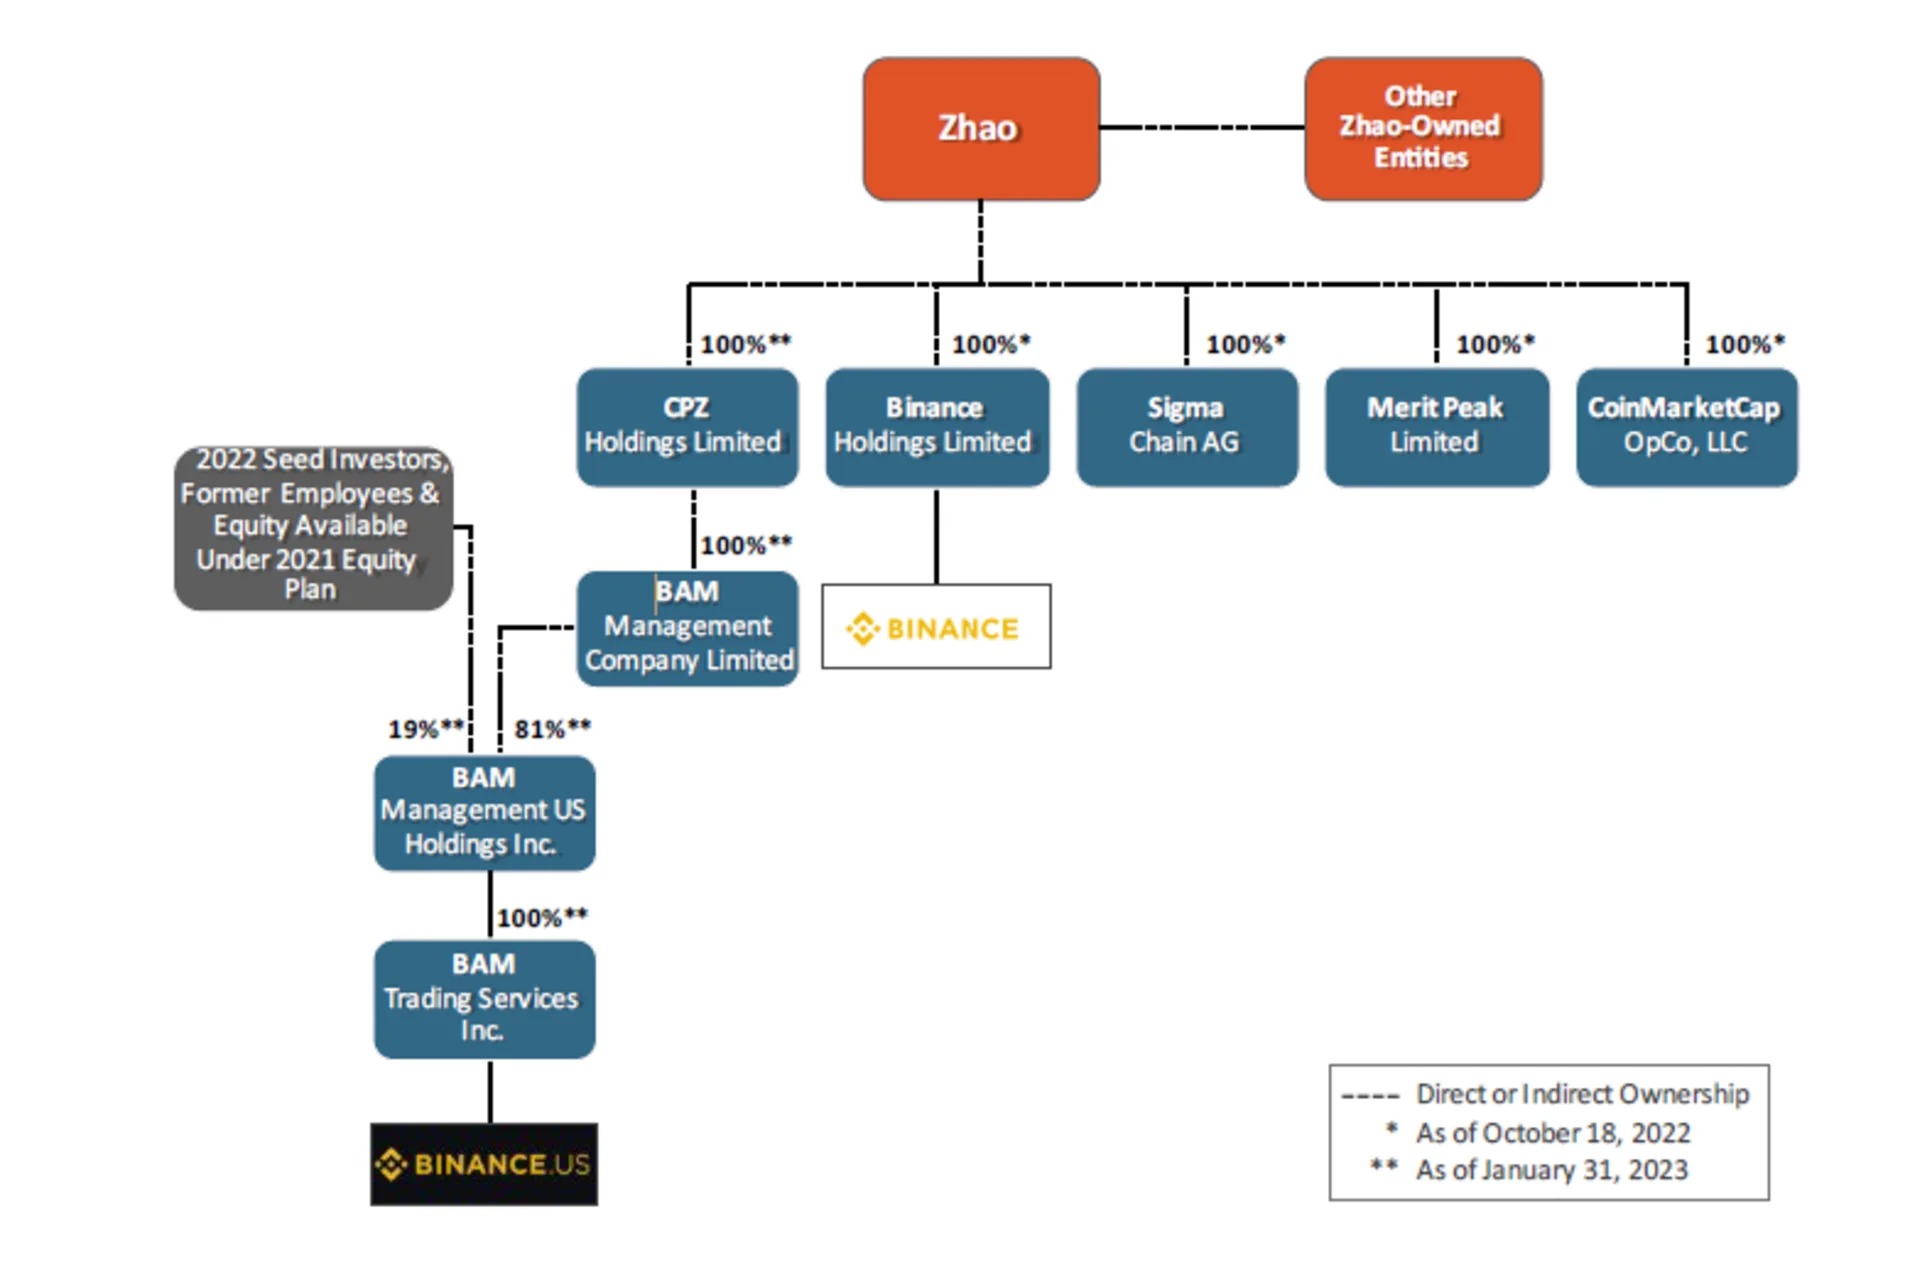 Ownership structure under Binance CEO Zhao